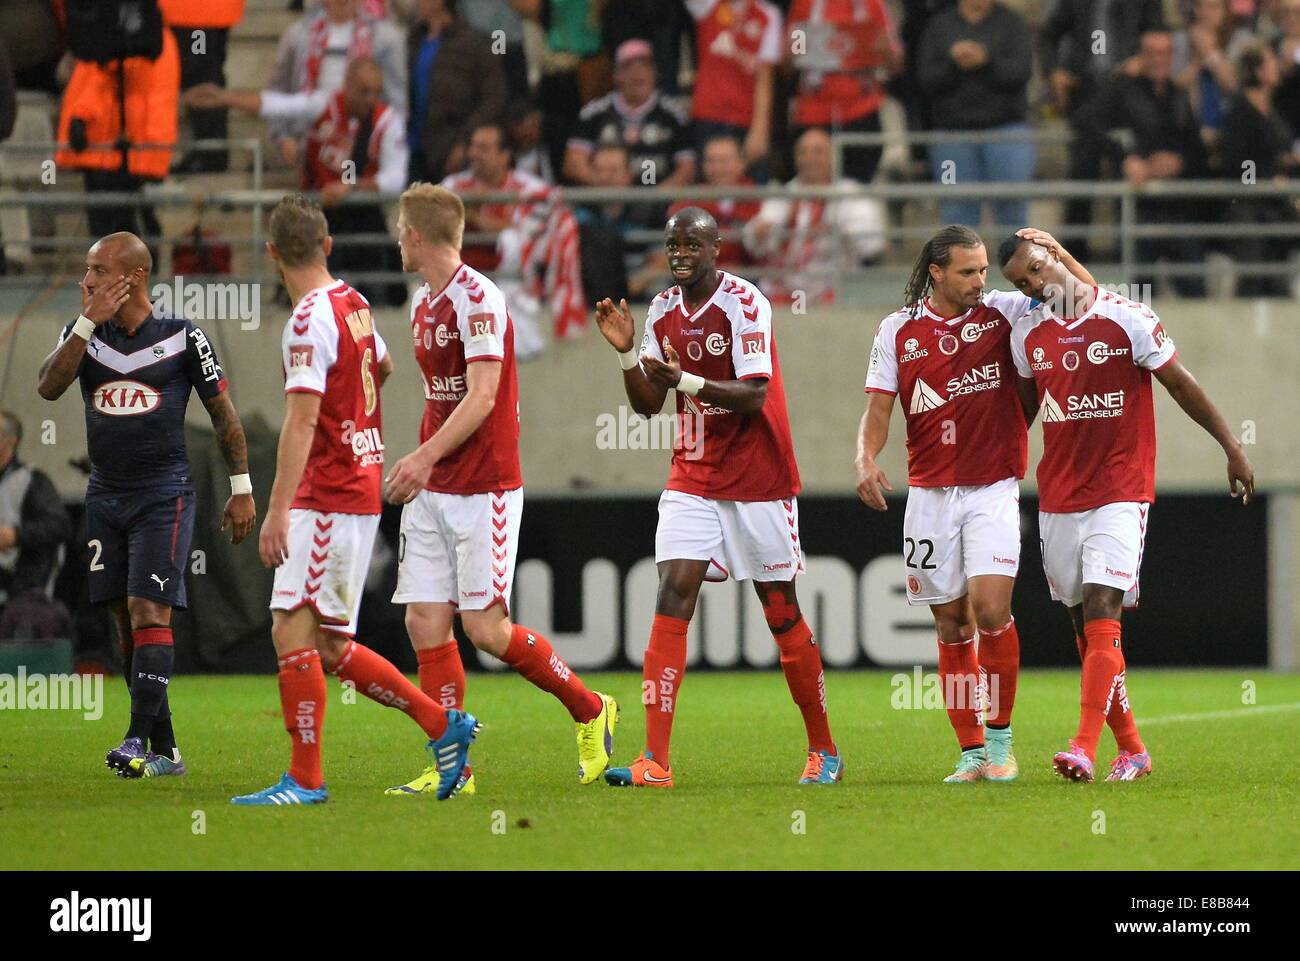 Rheims, France. 03rd Oct, 2014. French Division 1 League football. Reims versus Bordeaux. Odair Fortes (rei) and Mickael Tacalfred (rei) - Prince Oniangue (rei)celebrate their goal © Action Plus Sports/Alamy Live News Stock Photo